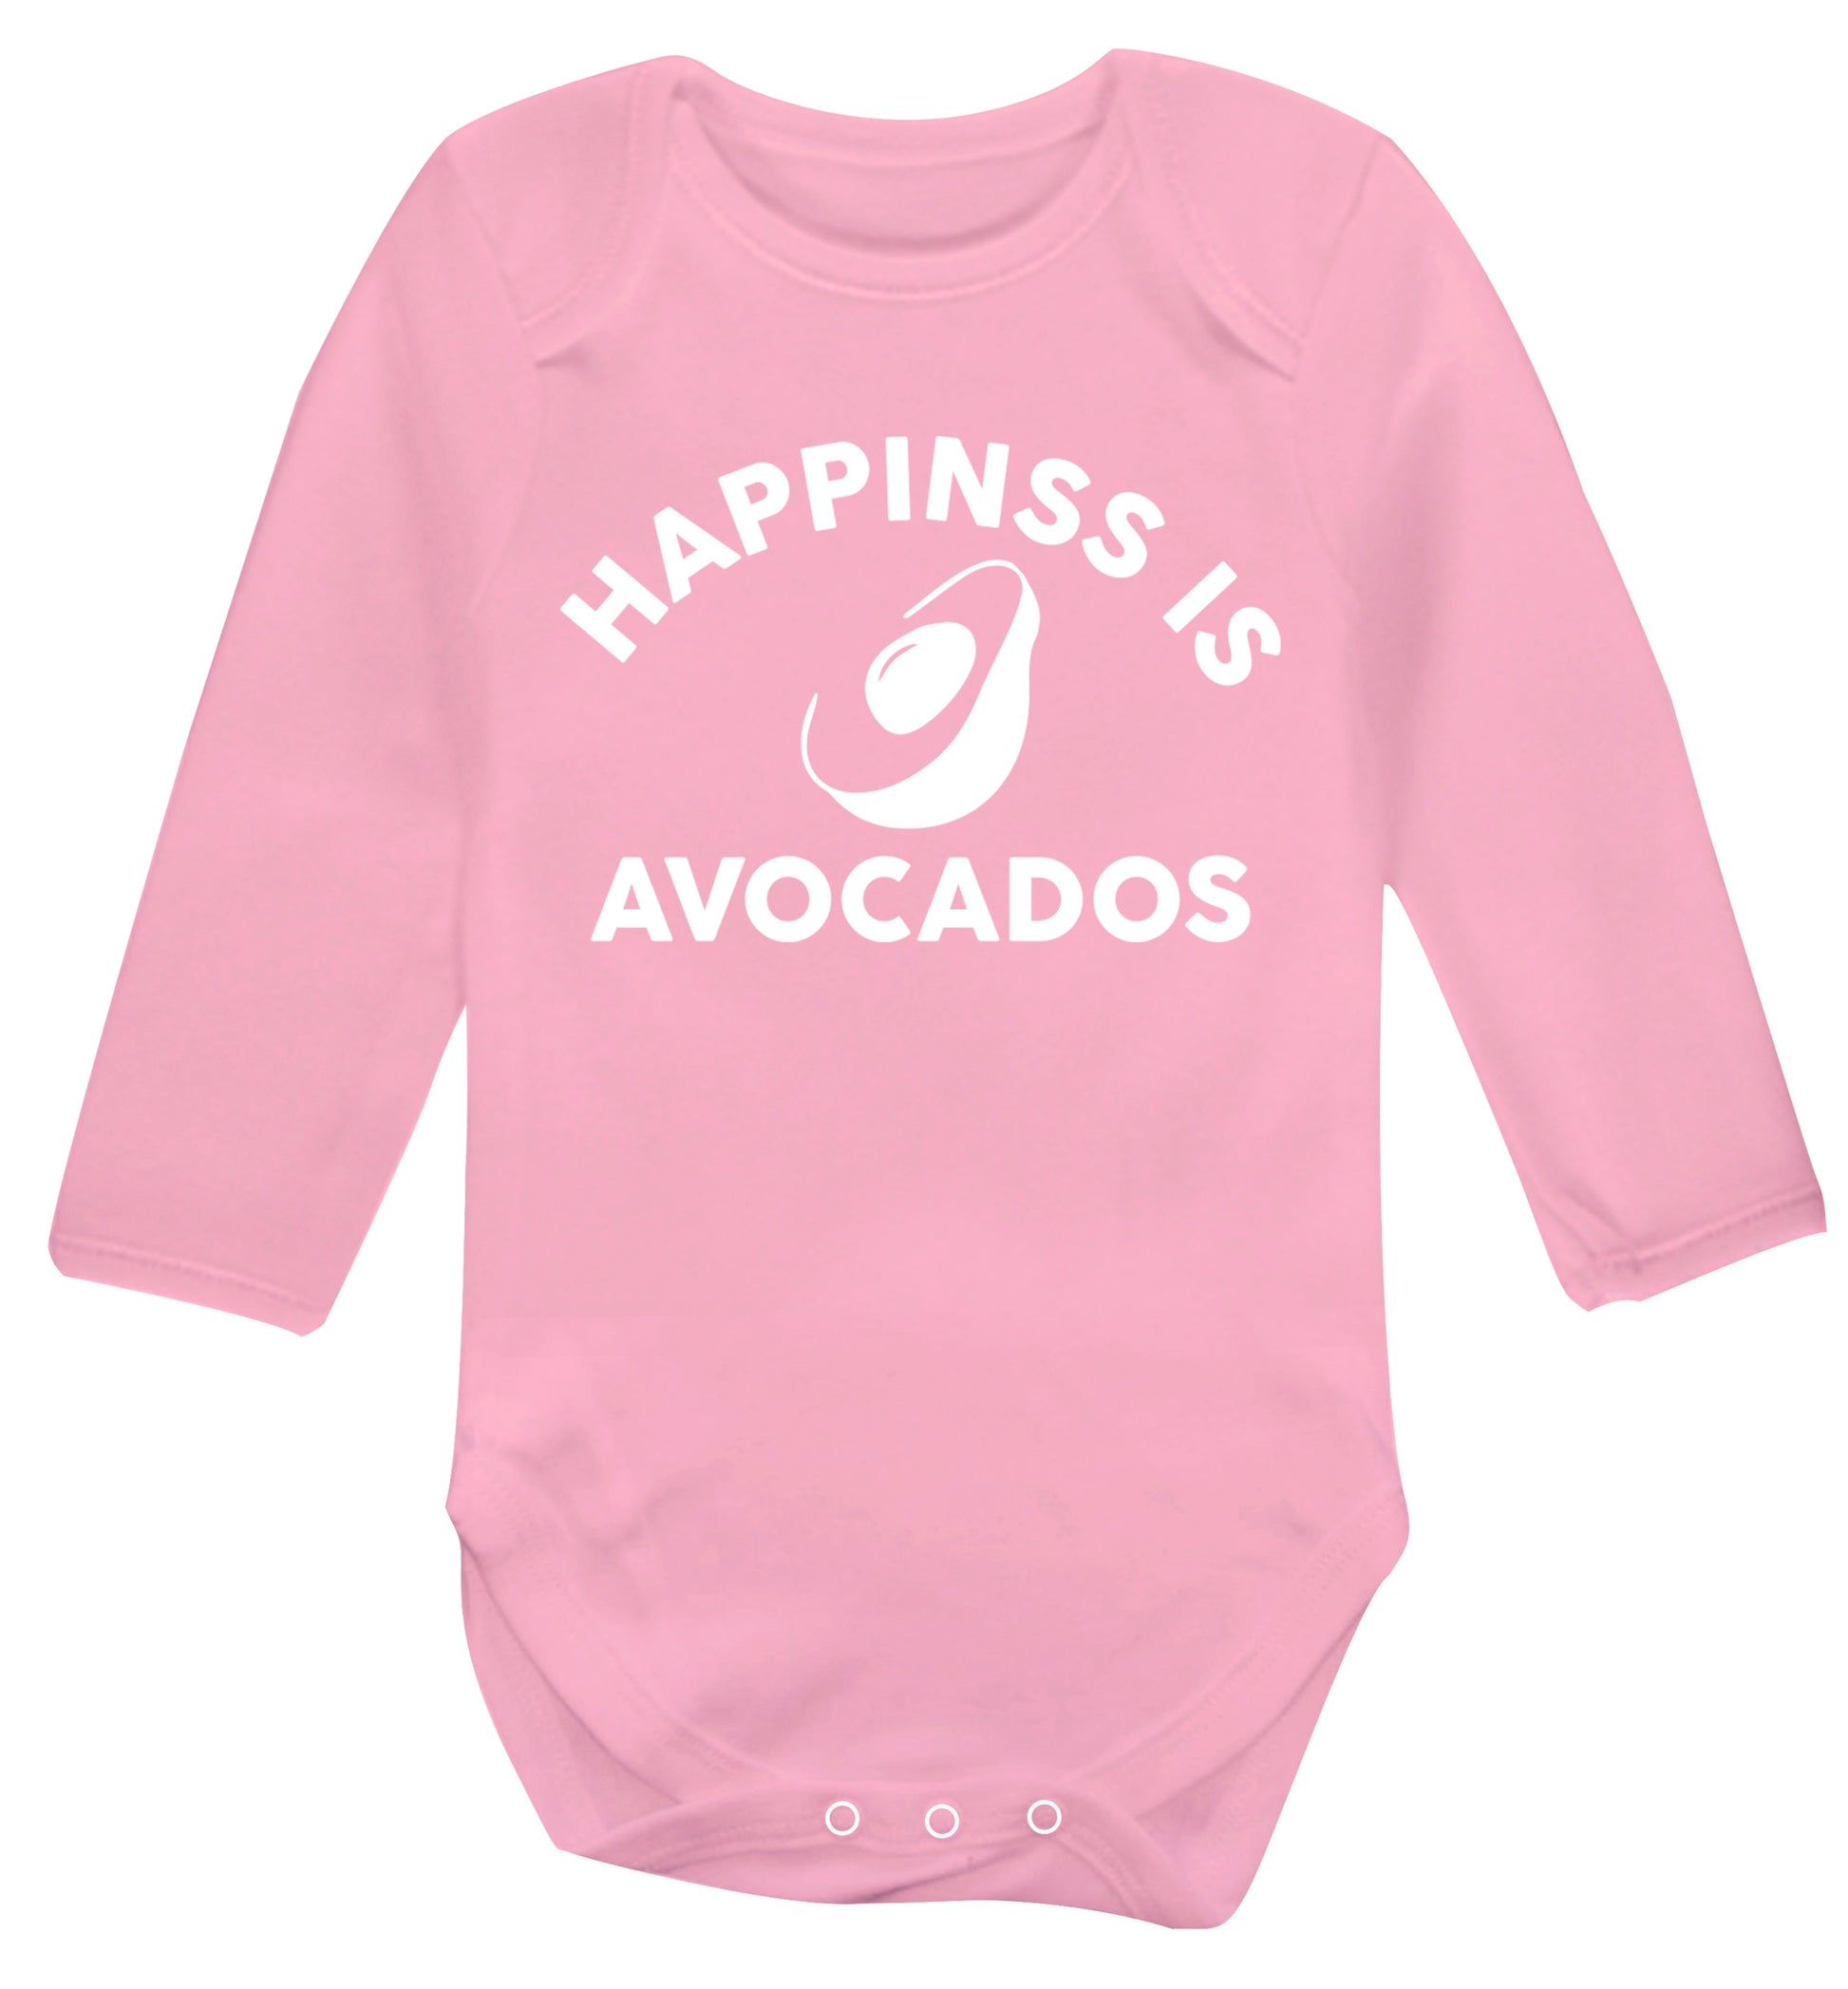 Happiness is avocados Baby Vest long sleeved pale pink 6-12 months